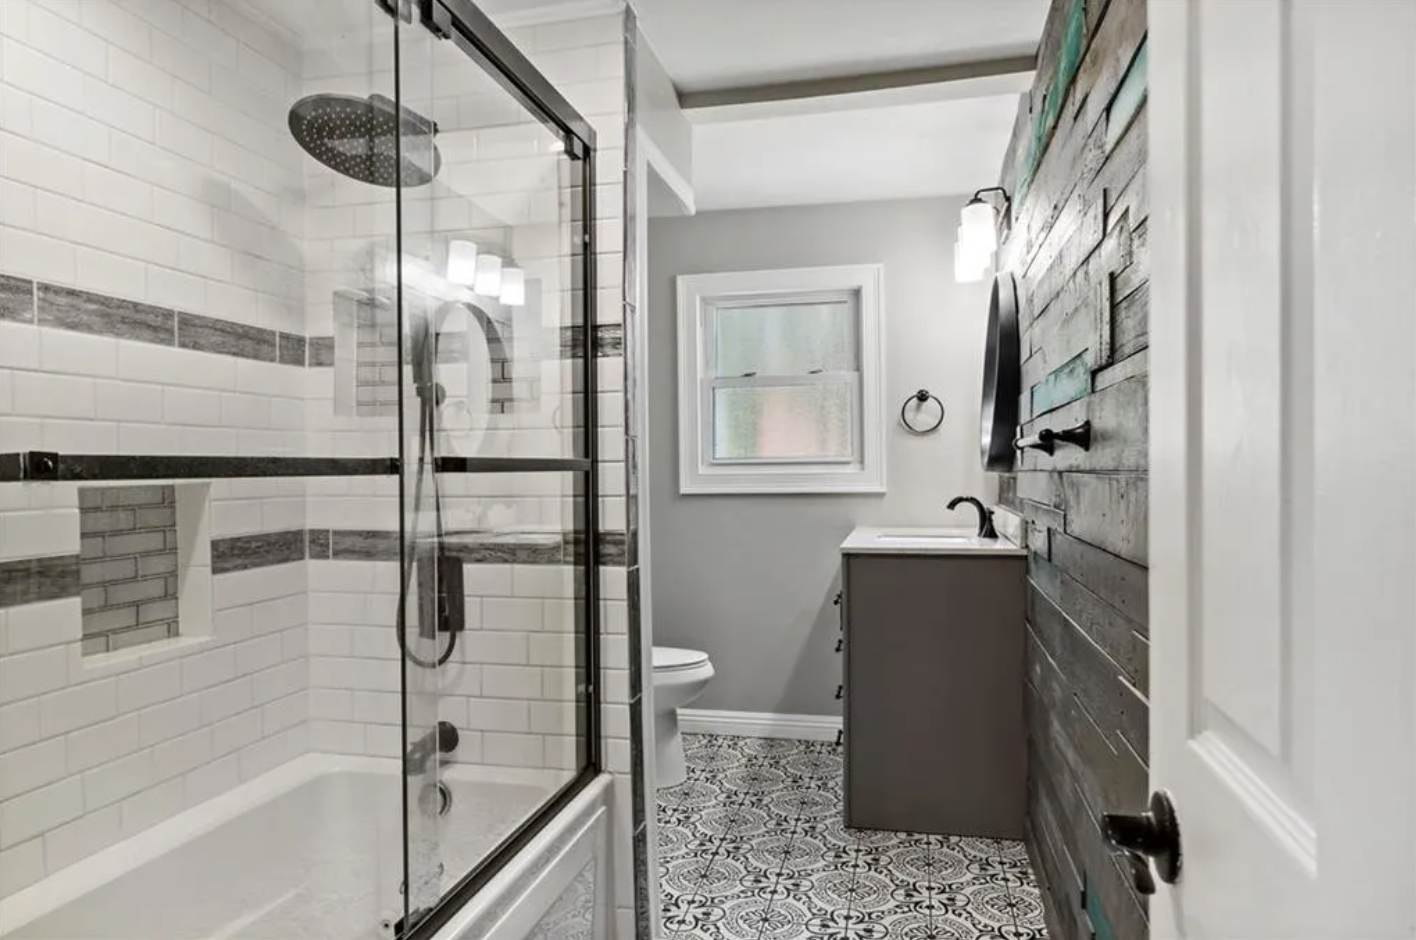 Bathroom with combination shower-bathtub, light gray walls, wood paneled accent wall, and single vanity.